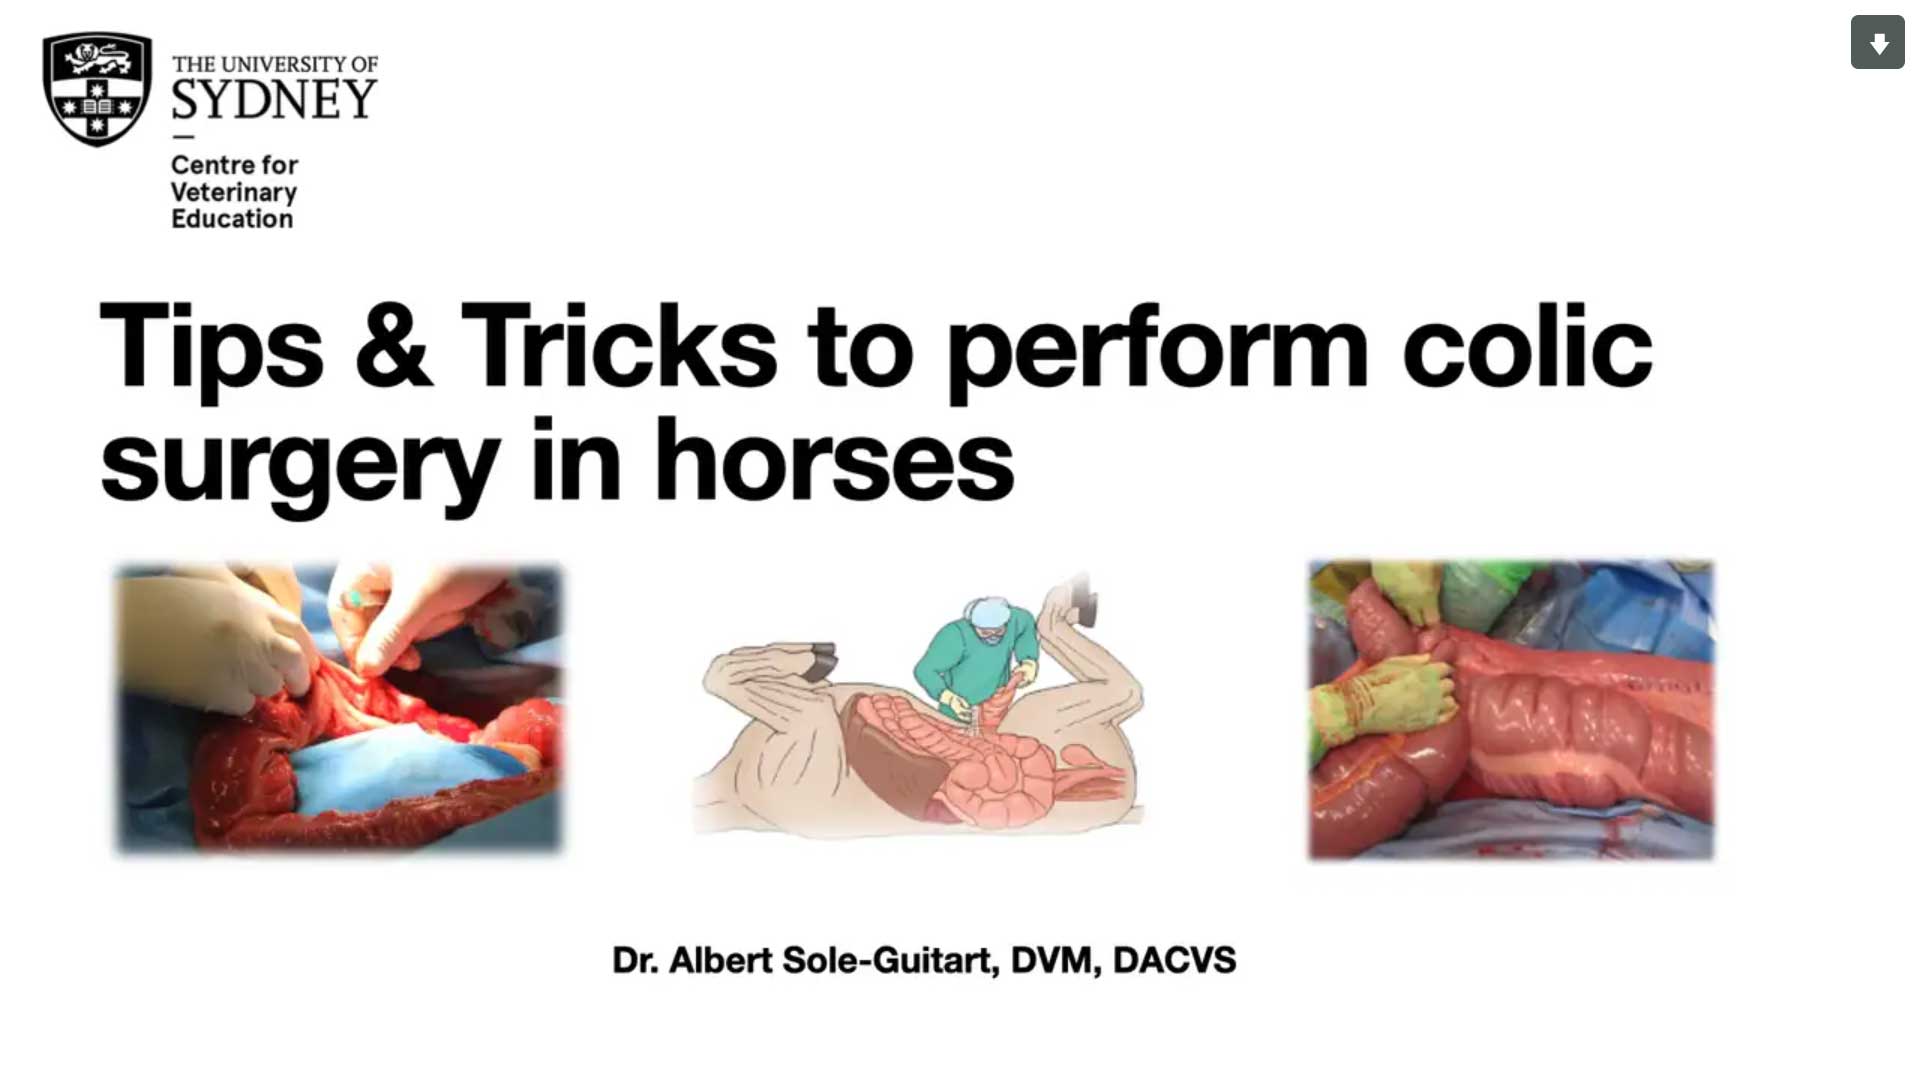 Tips and Tricks for Colic Surgery in Horses